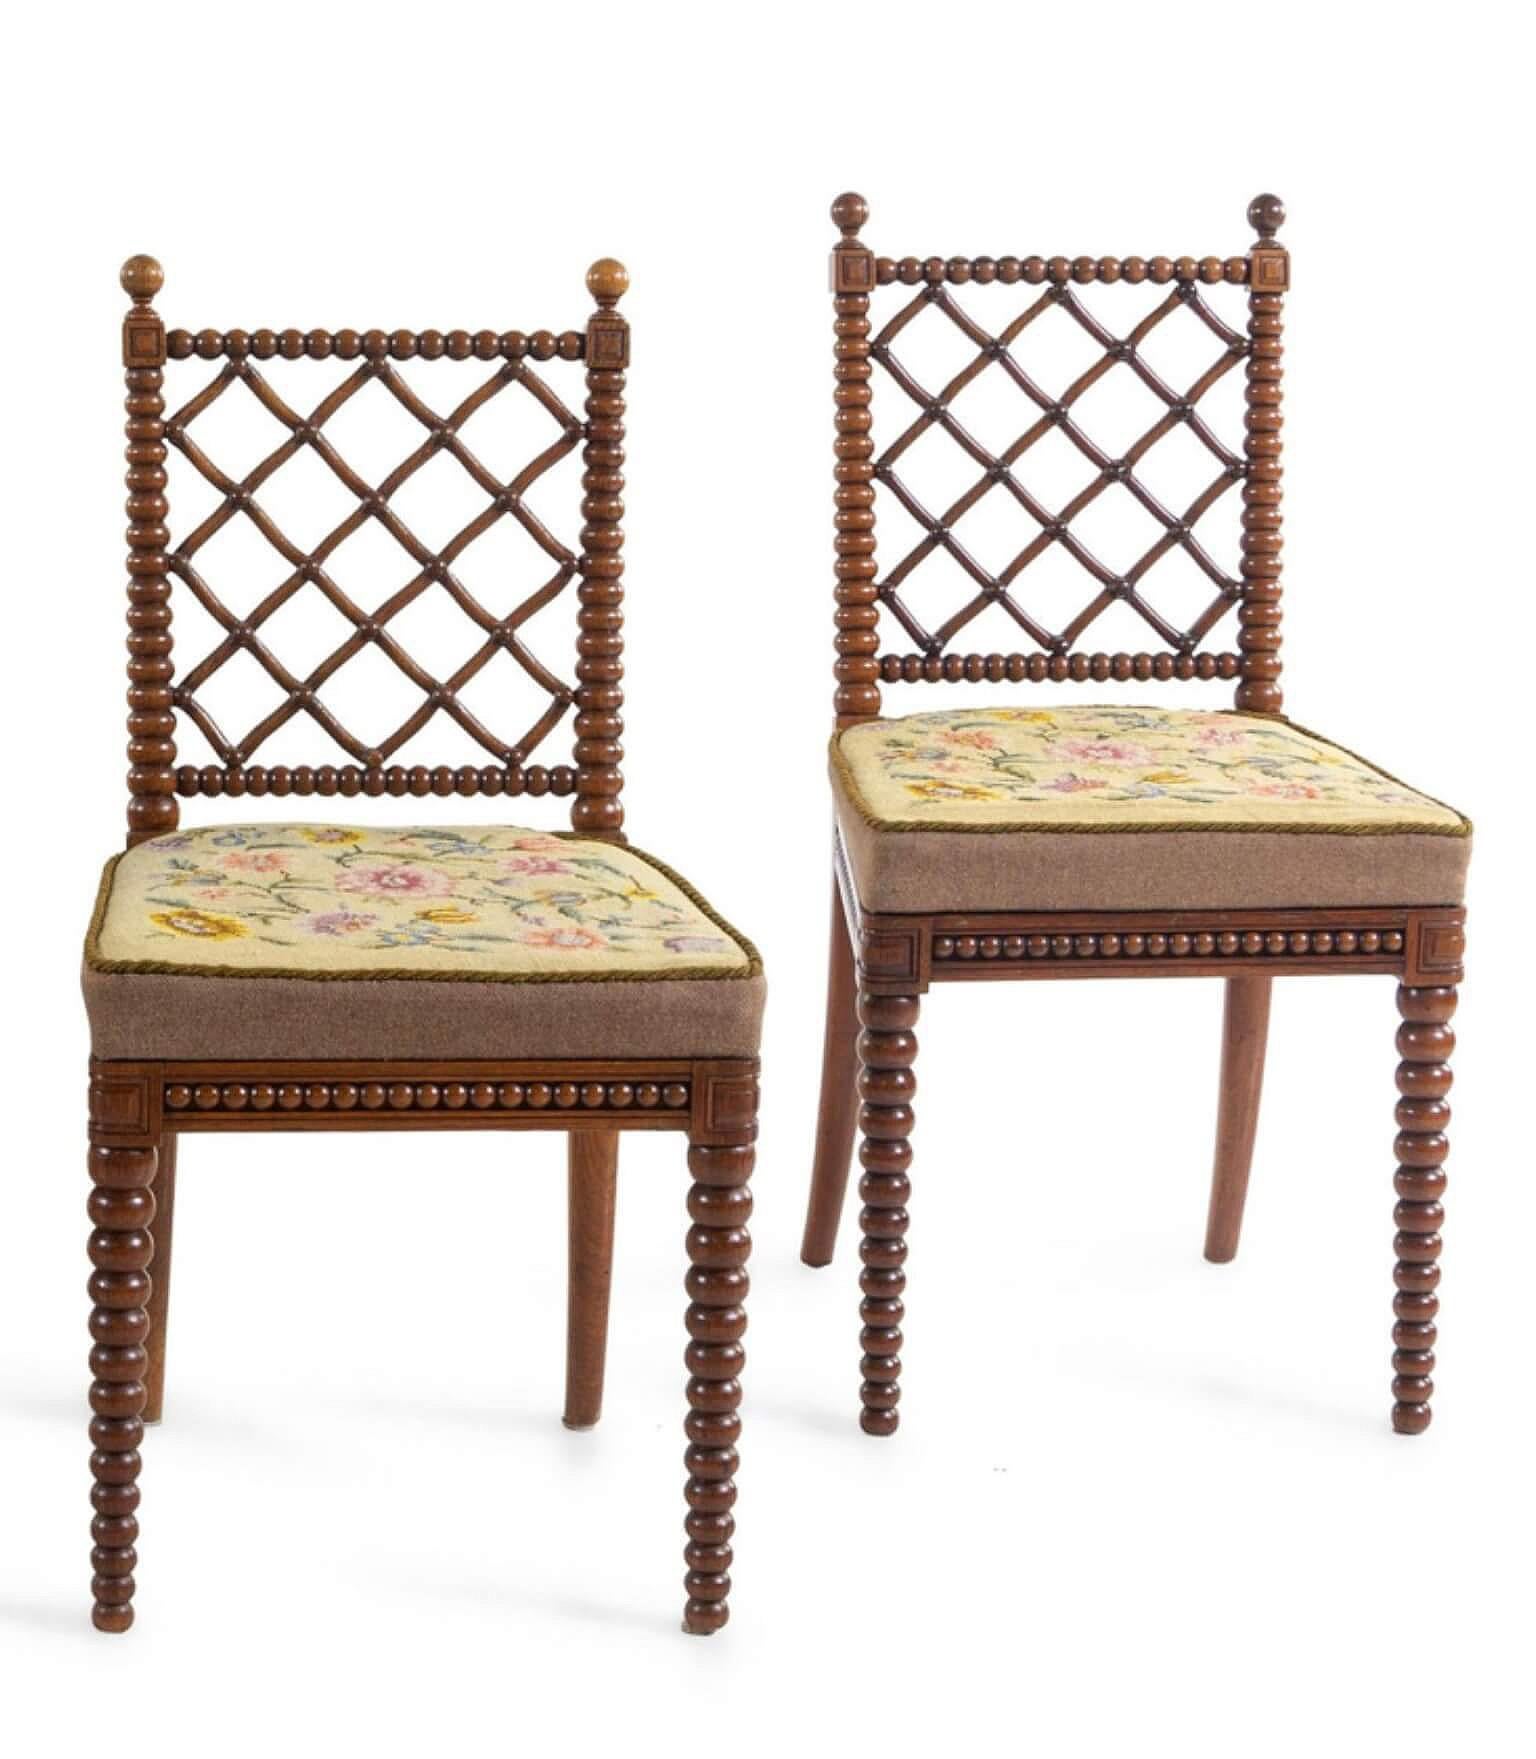 19th Century English Regency Oak Bobbin Chairs Attributed to Gillows, Set of Four, circa 1825